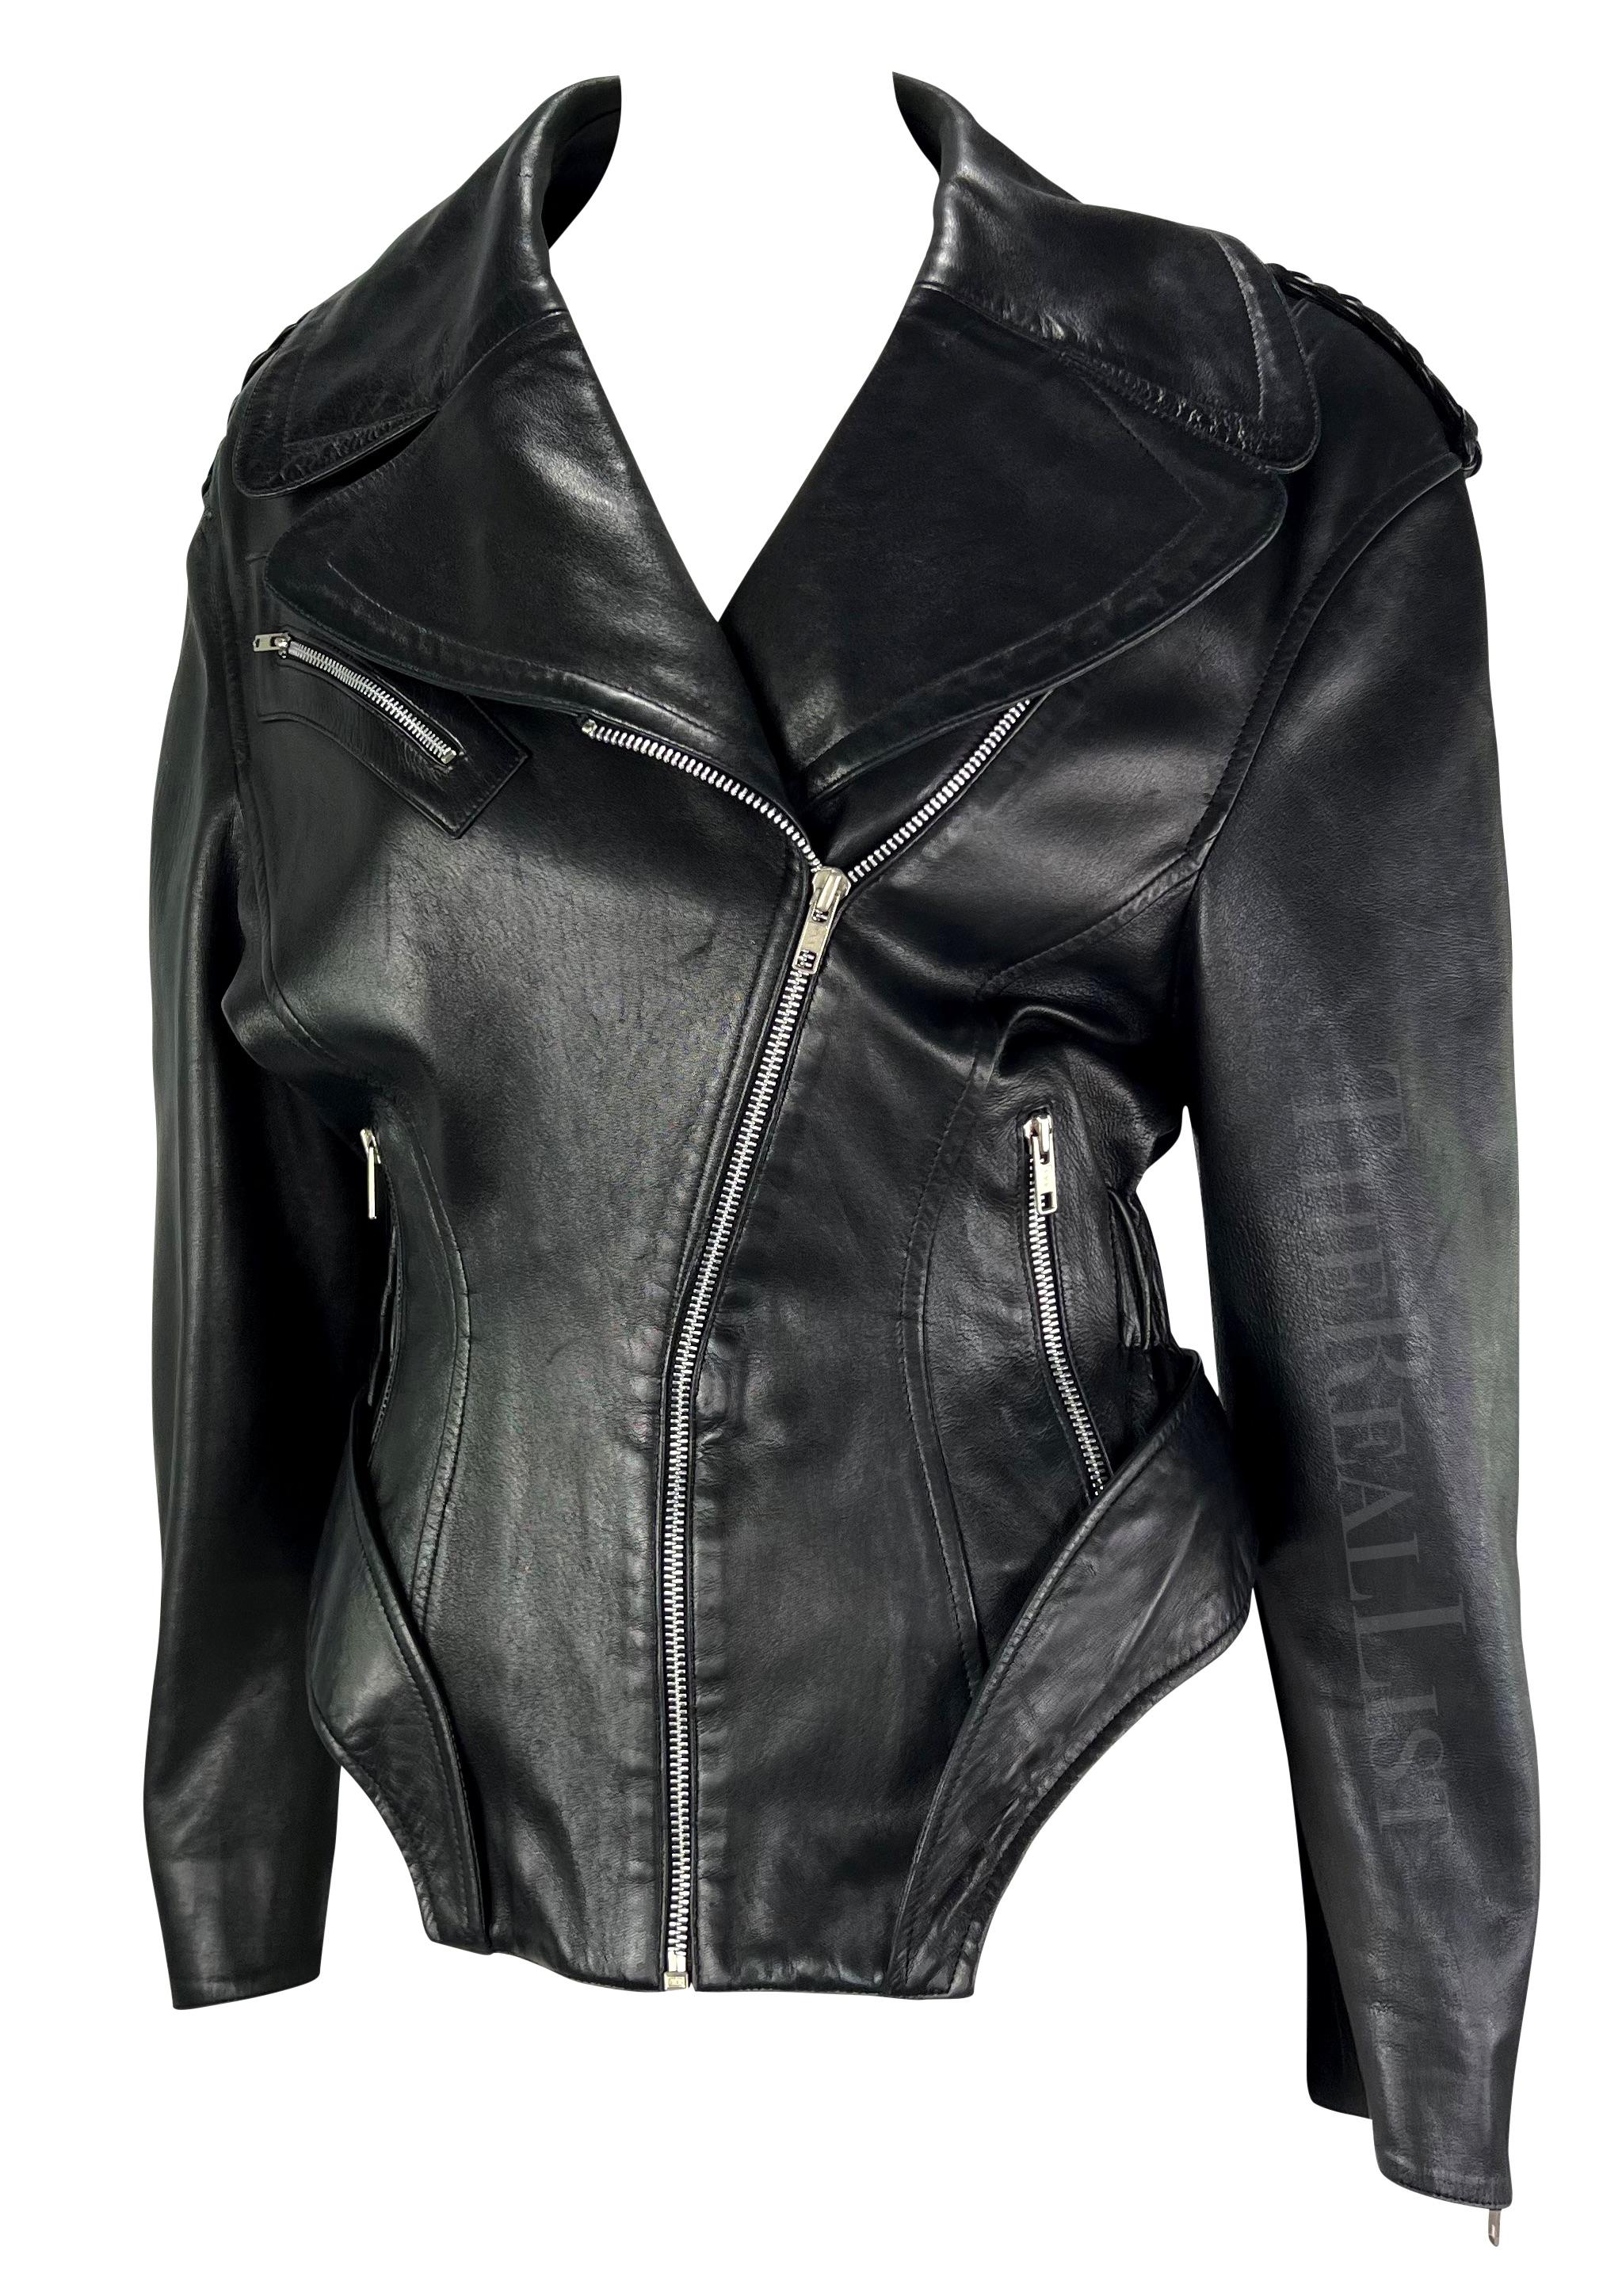 F/W 1988 Thierry Mugler 'Les Infernales' Hip Cutout Leather Moto Biker Jacket In Good Condition For Sale In West Hollywood, CA